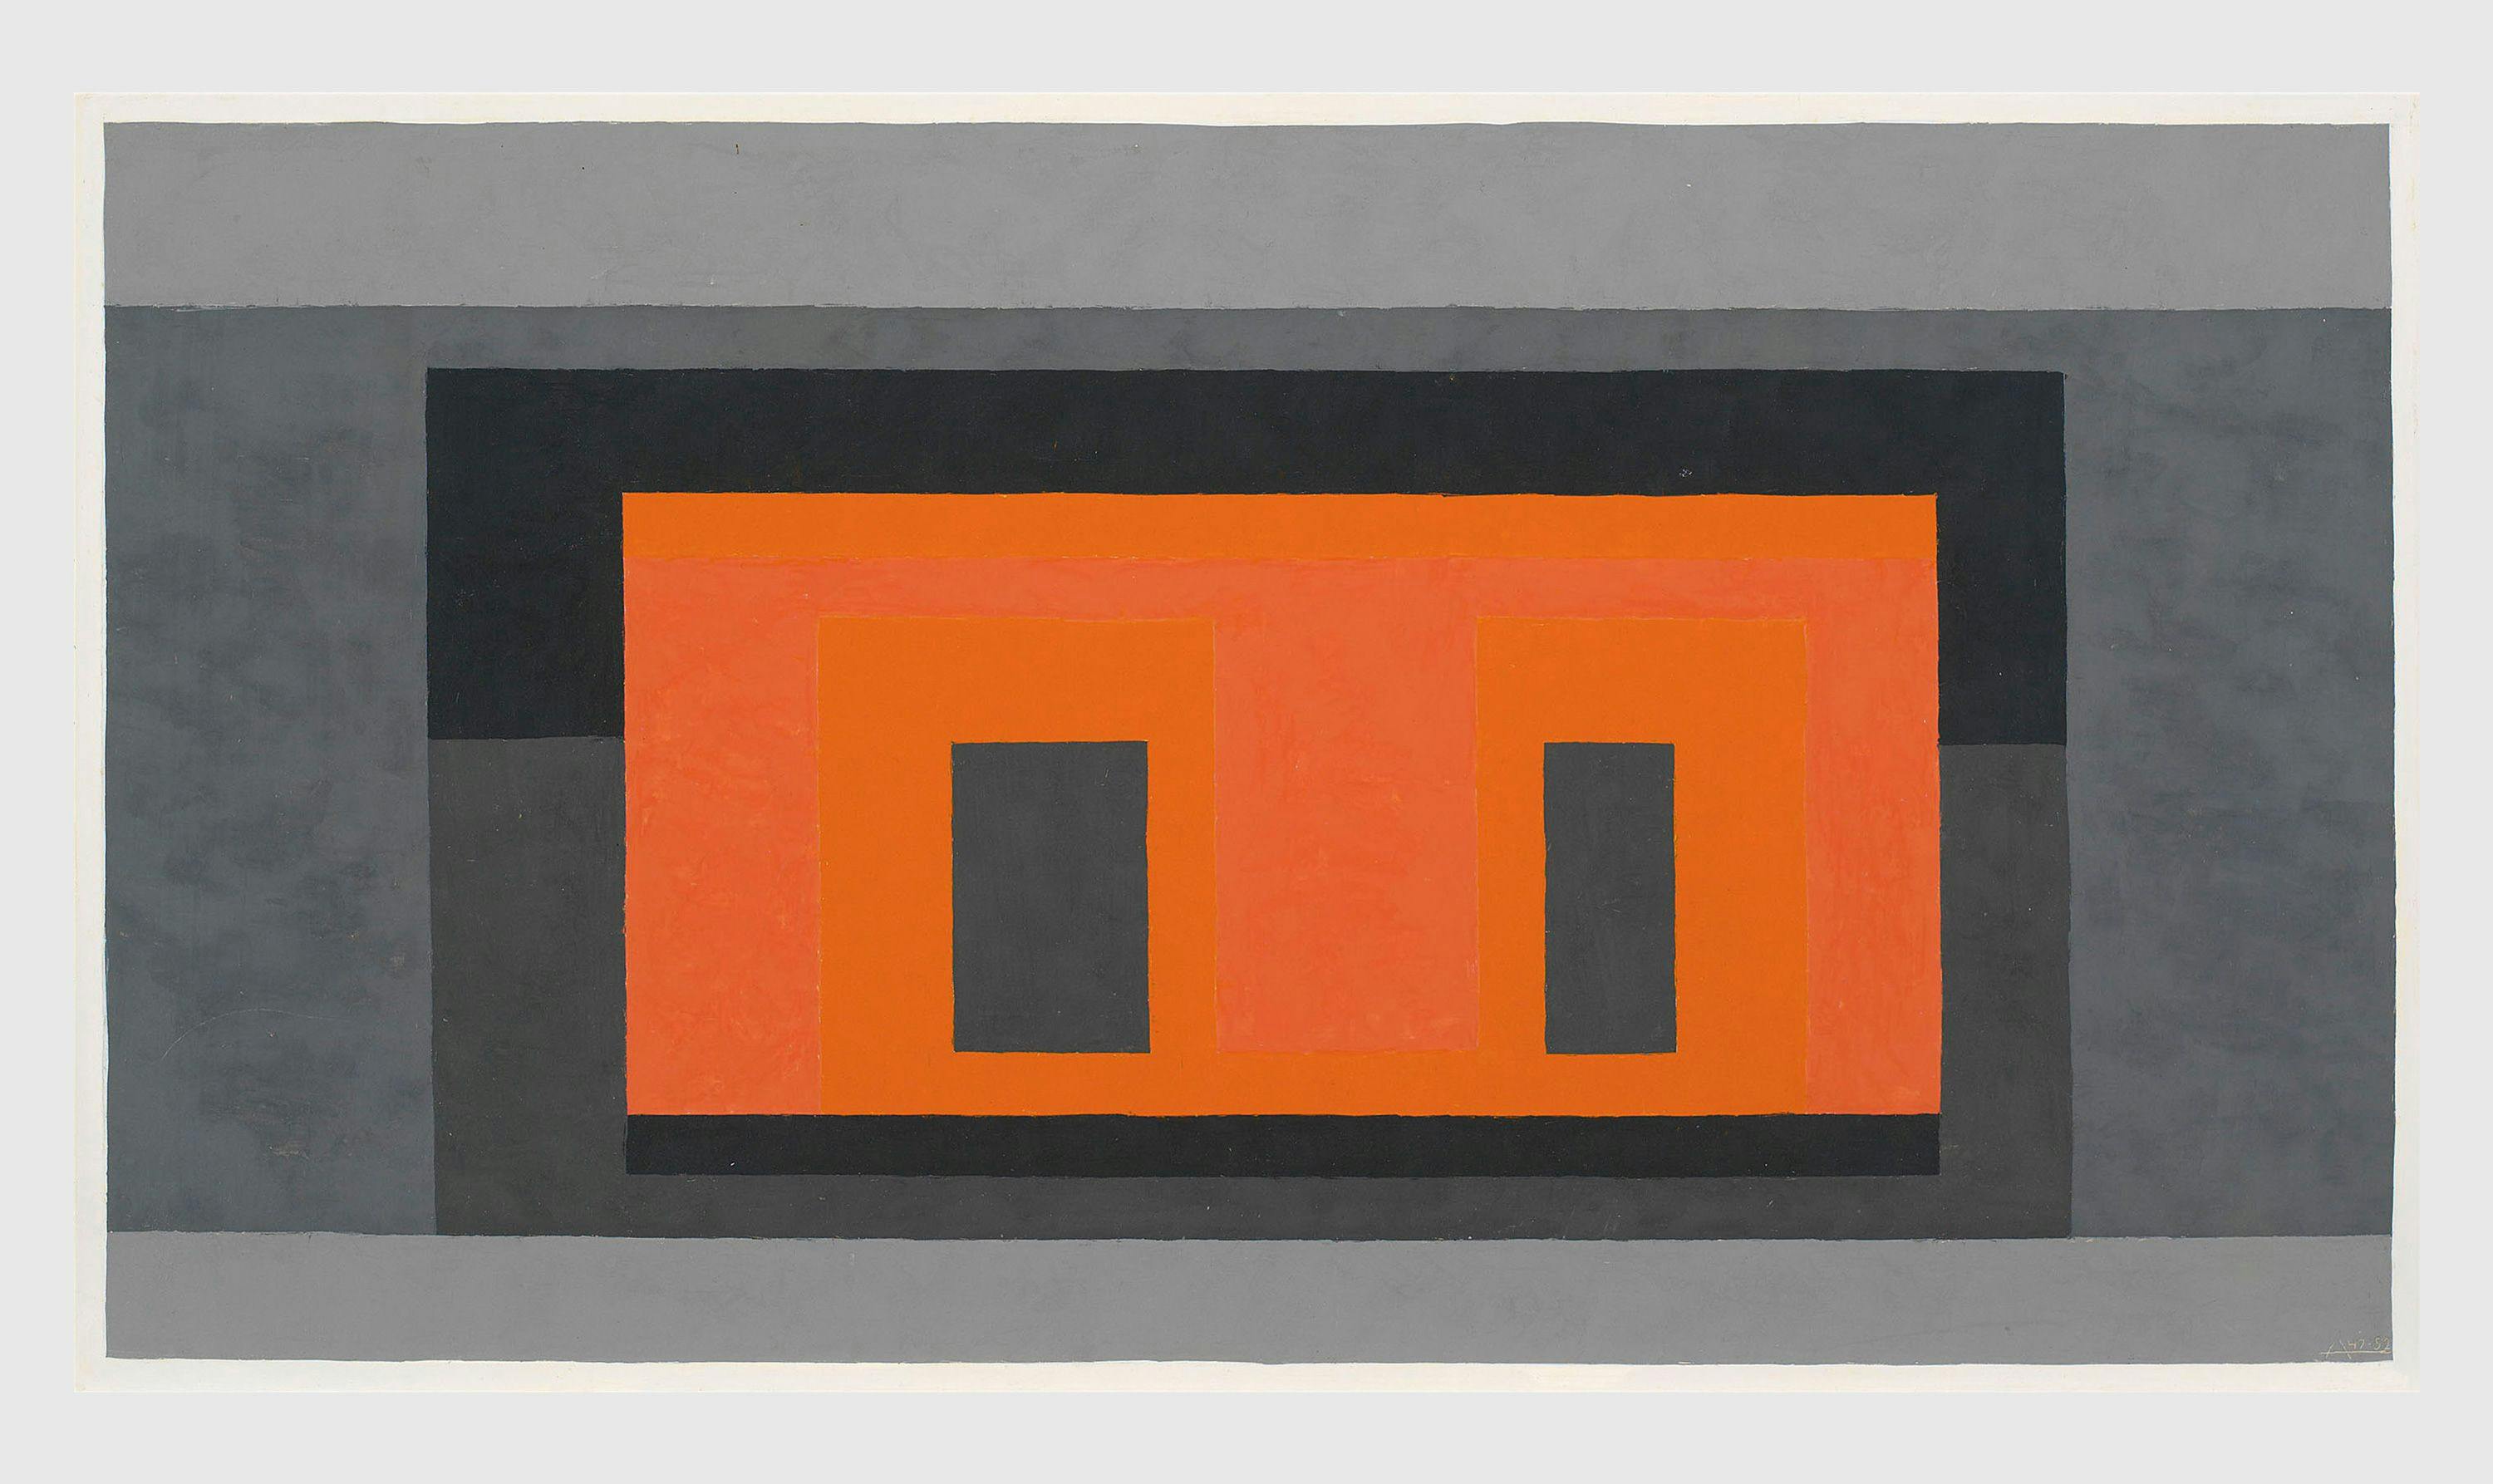 A painting by Josef Albers, titled Homage to the Square: Guarded, dated 1952.